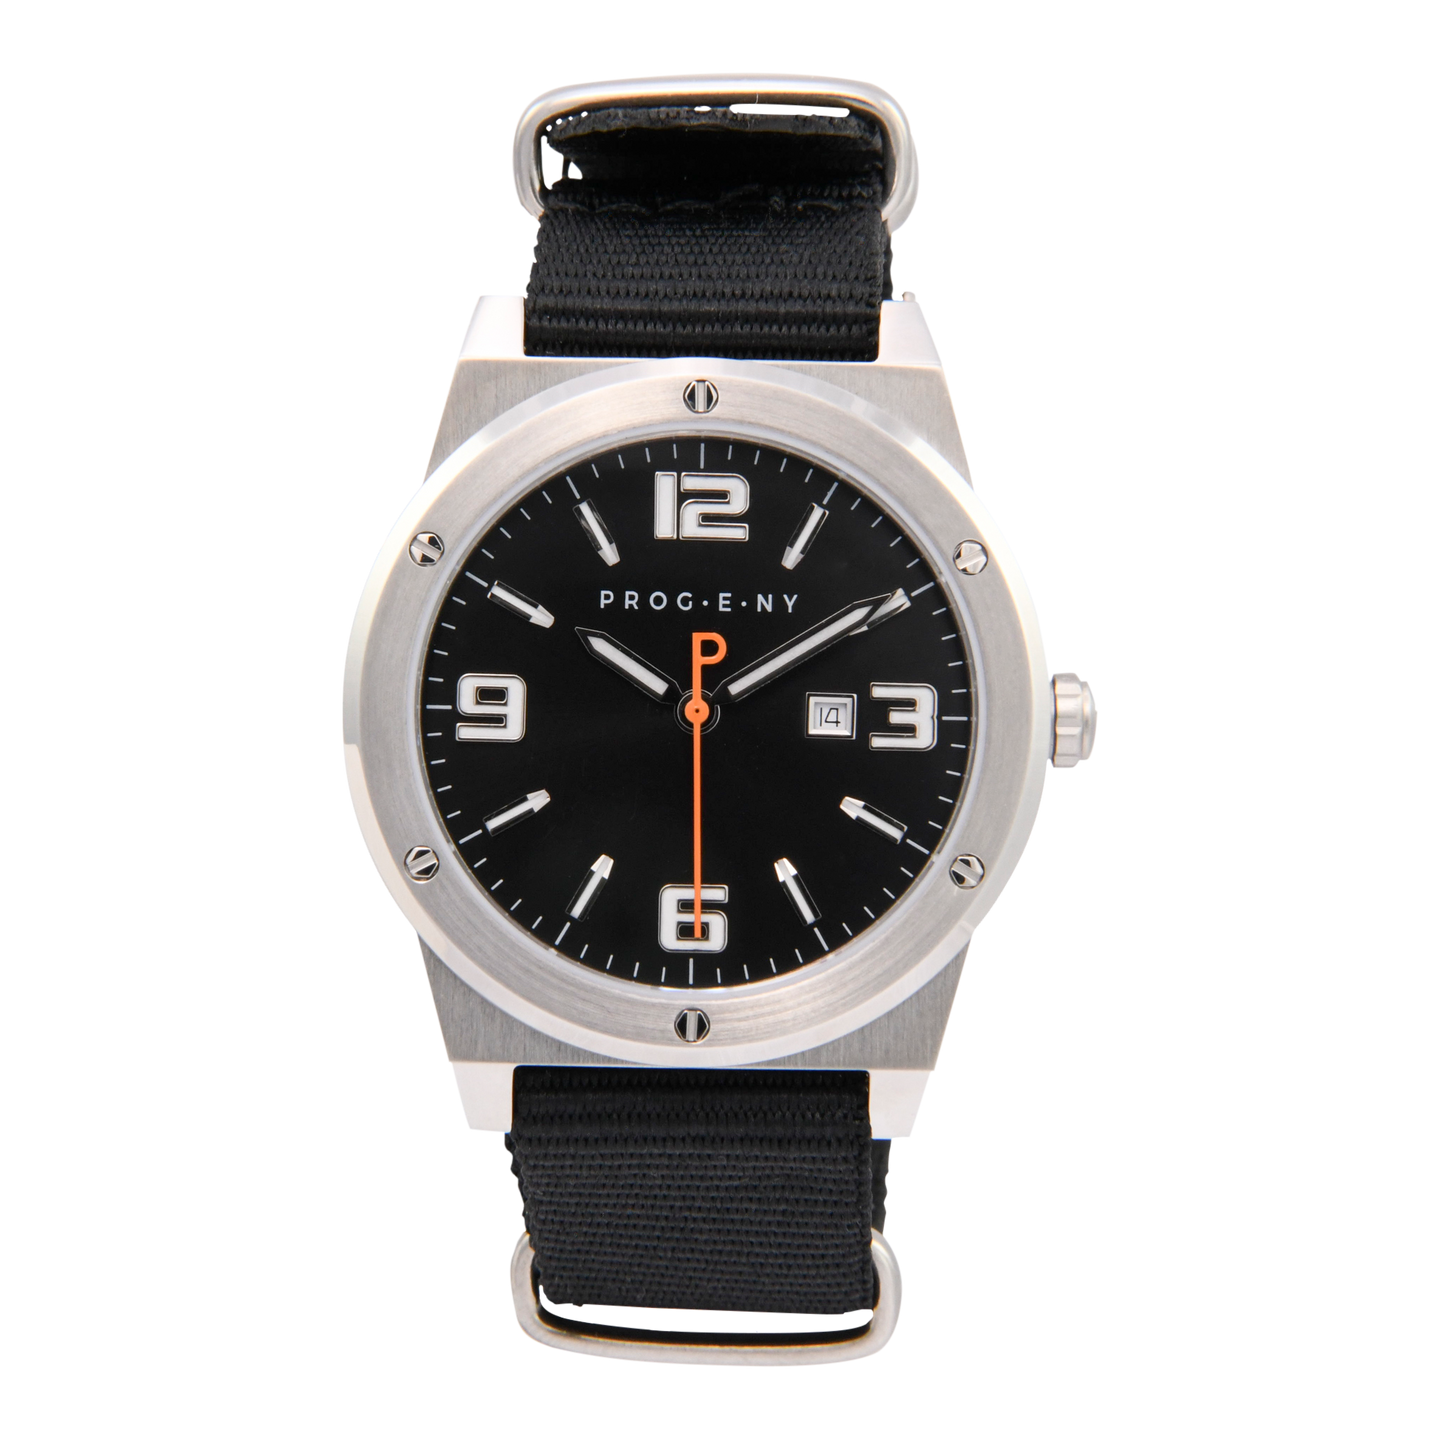 Lineage (36mm) - Black